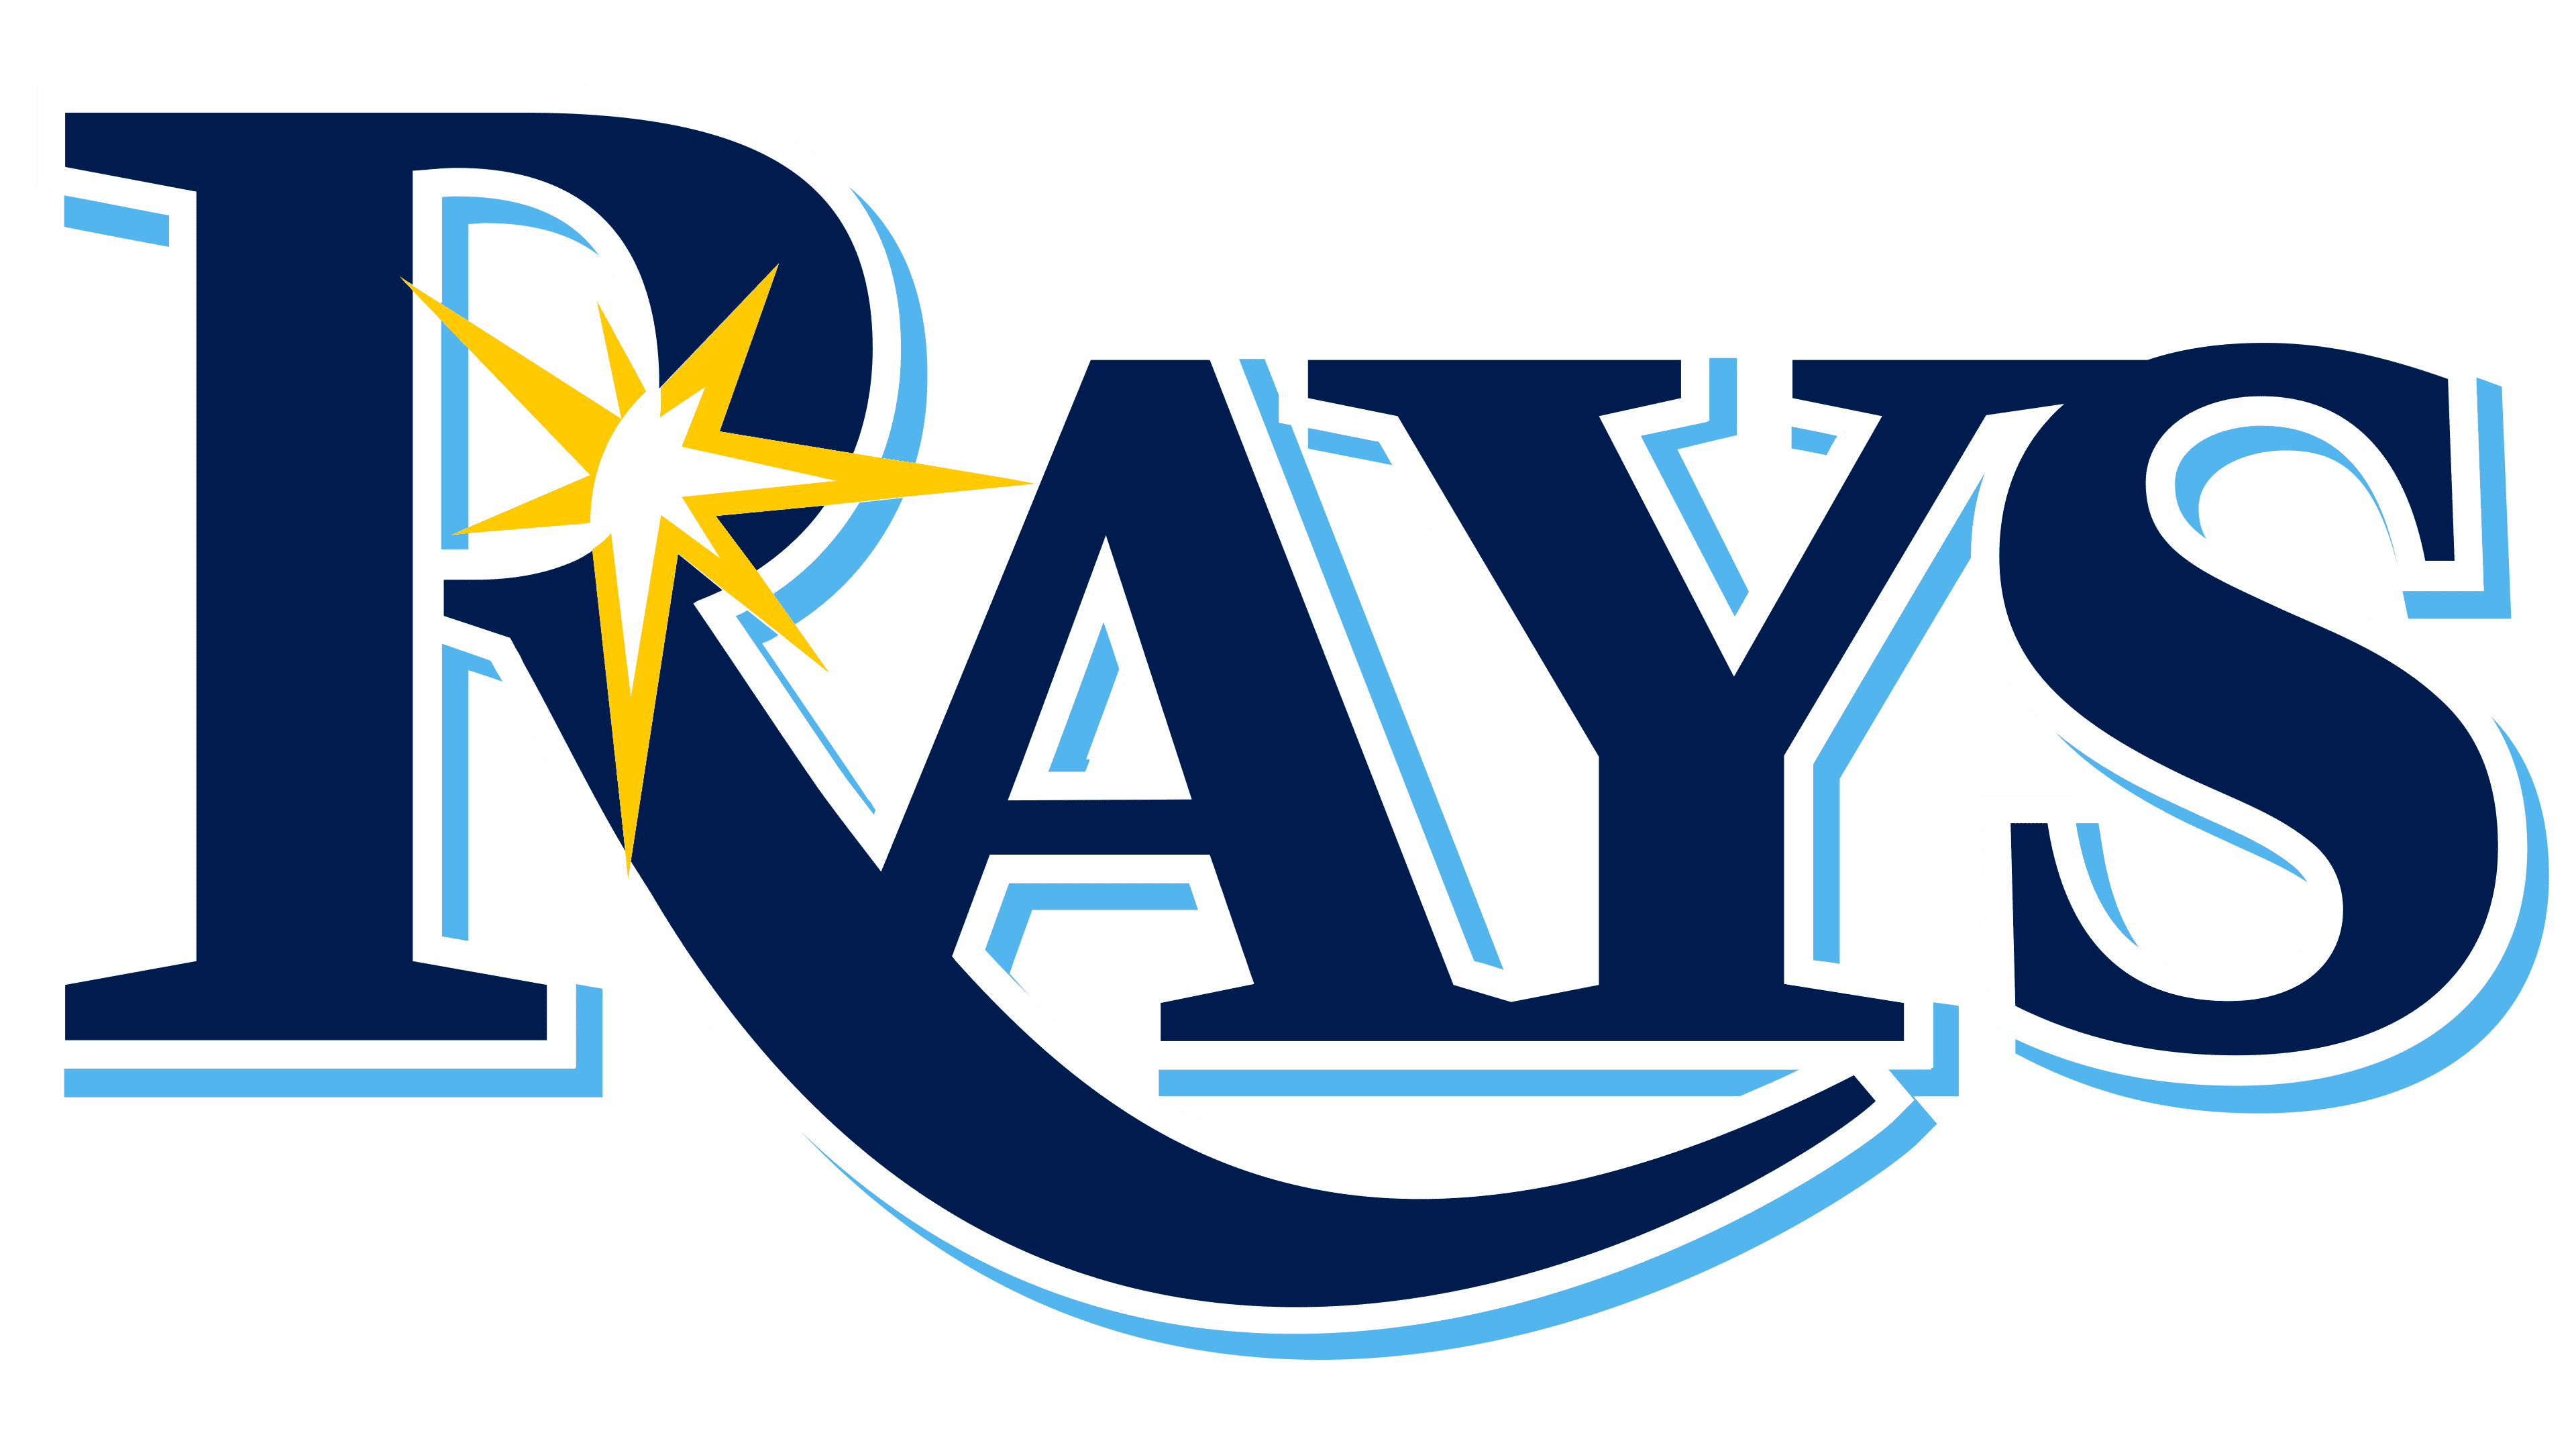 Tampa Bay Rays Logo Symbol Meaning History Png Brand